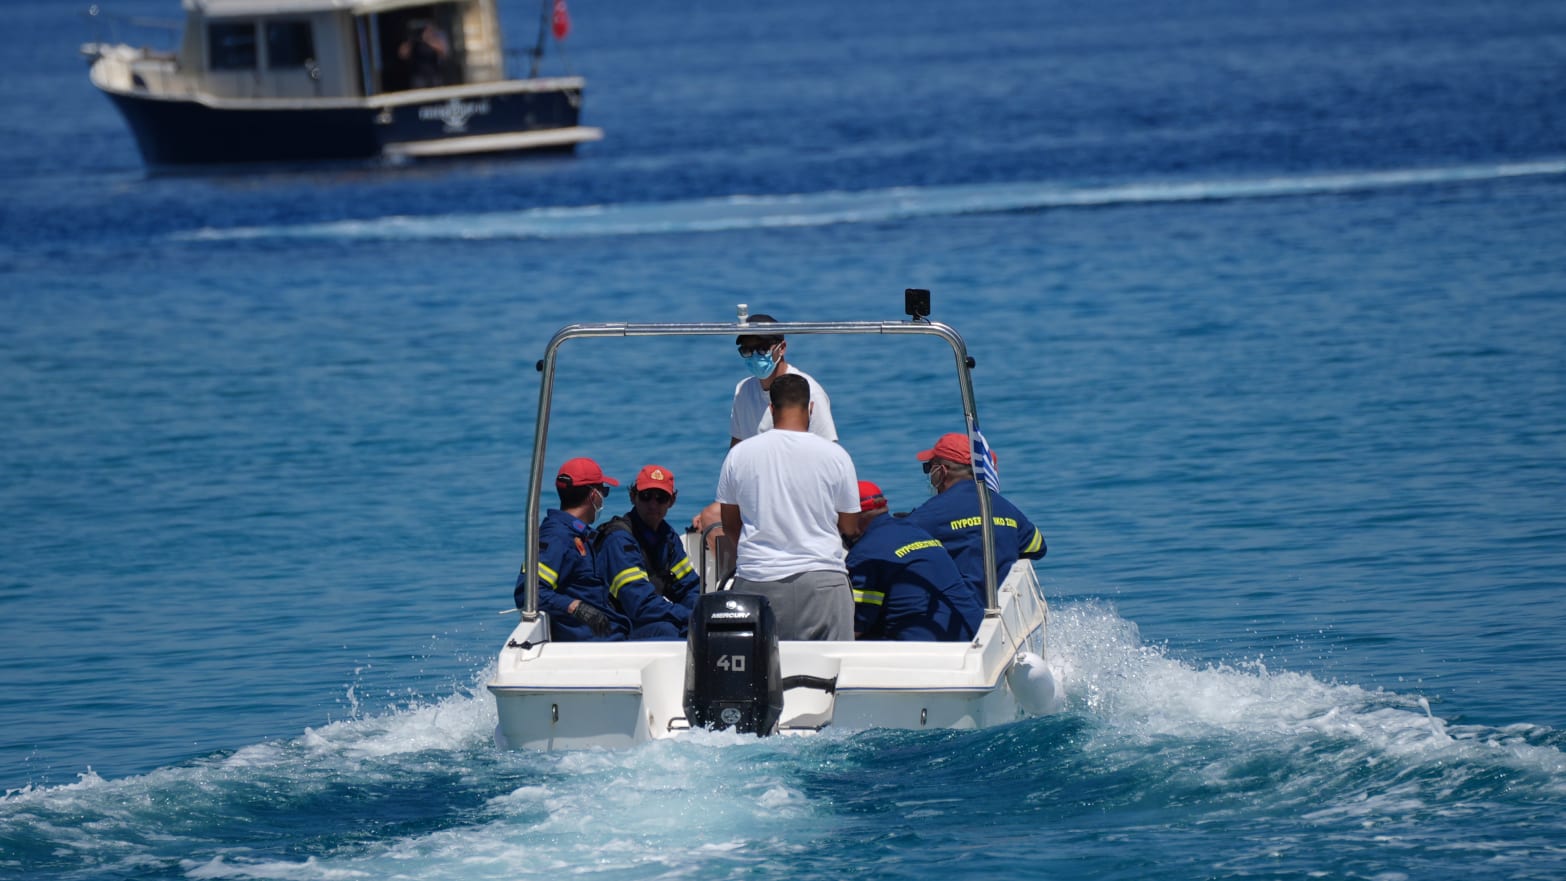 Emergency services leave Agia Marina in Symi, Greece, where the body of TV doctor and columnist Michael Mosley